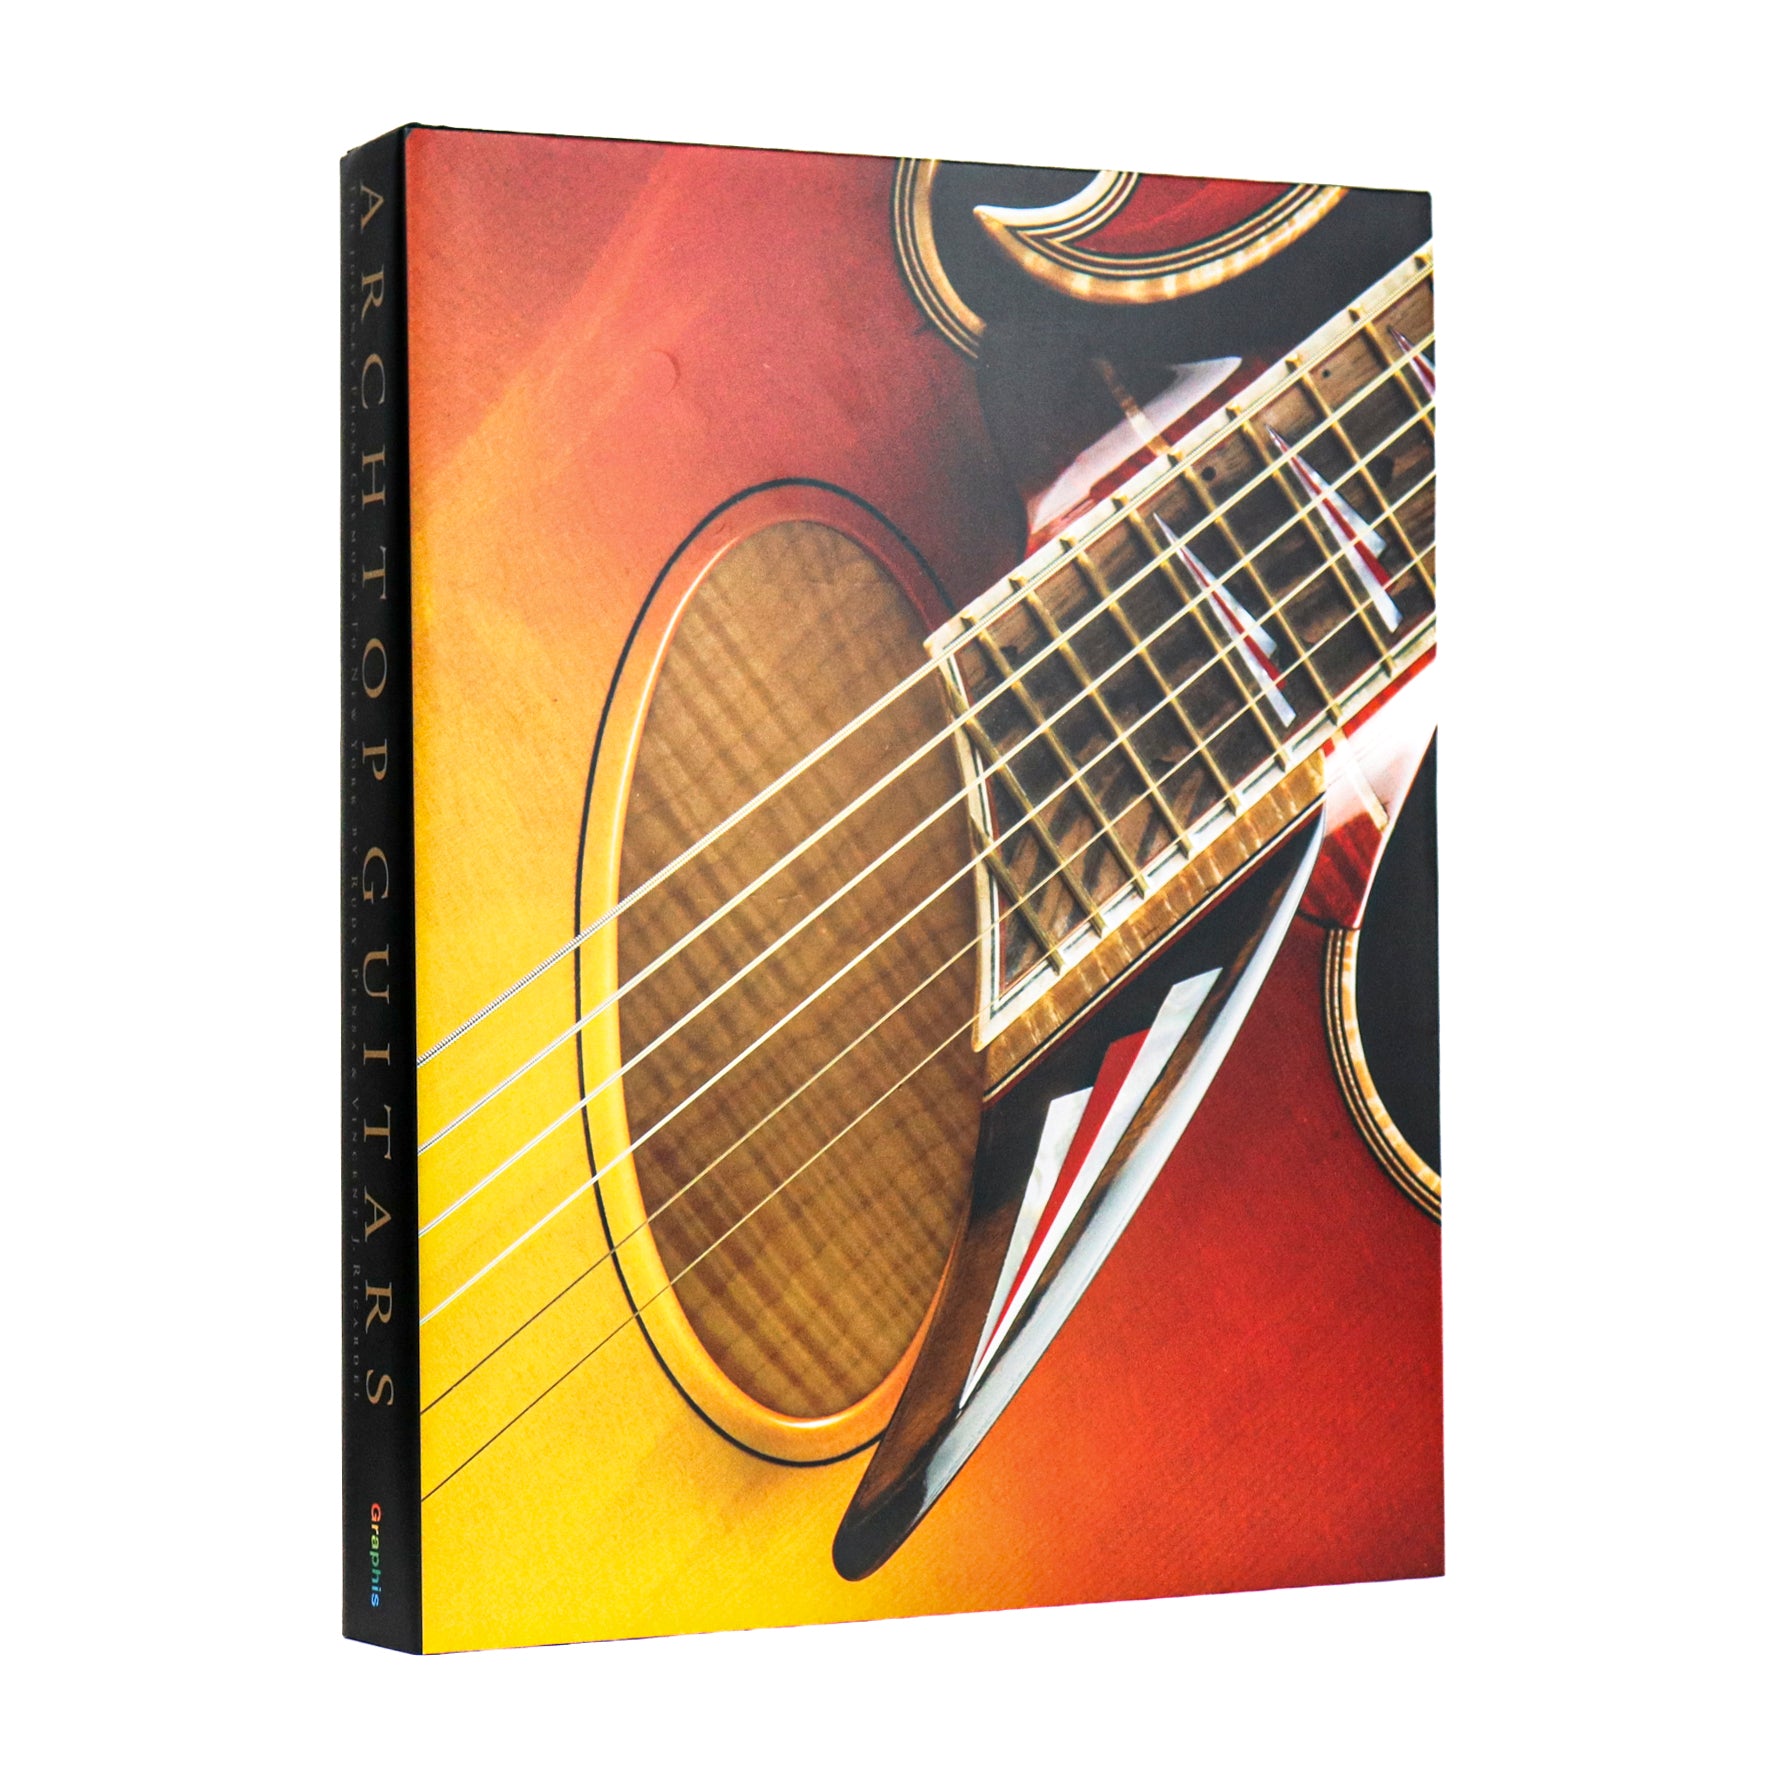 Archtop Guitars: The Journey from Cremona to New York by Rudy Pensa Deluxe Edition